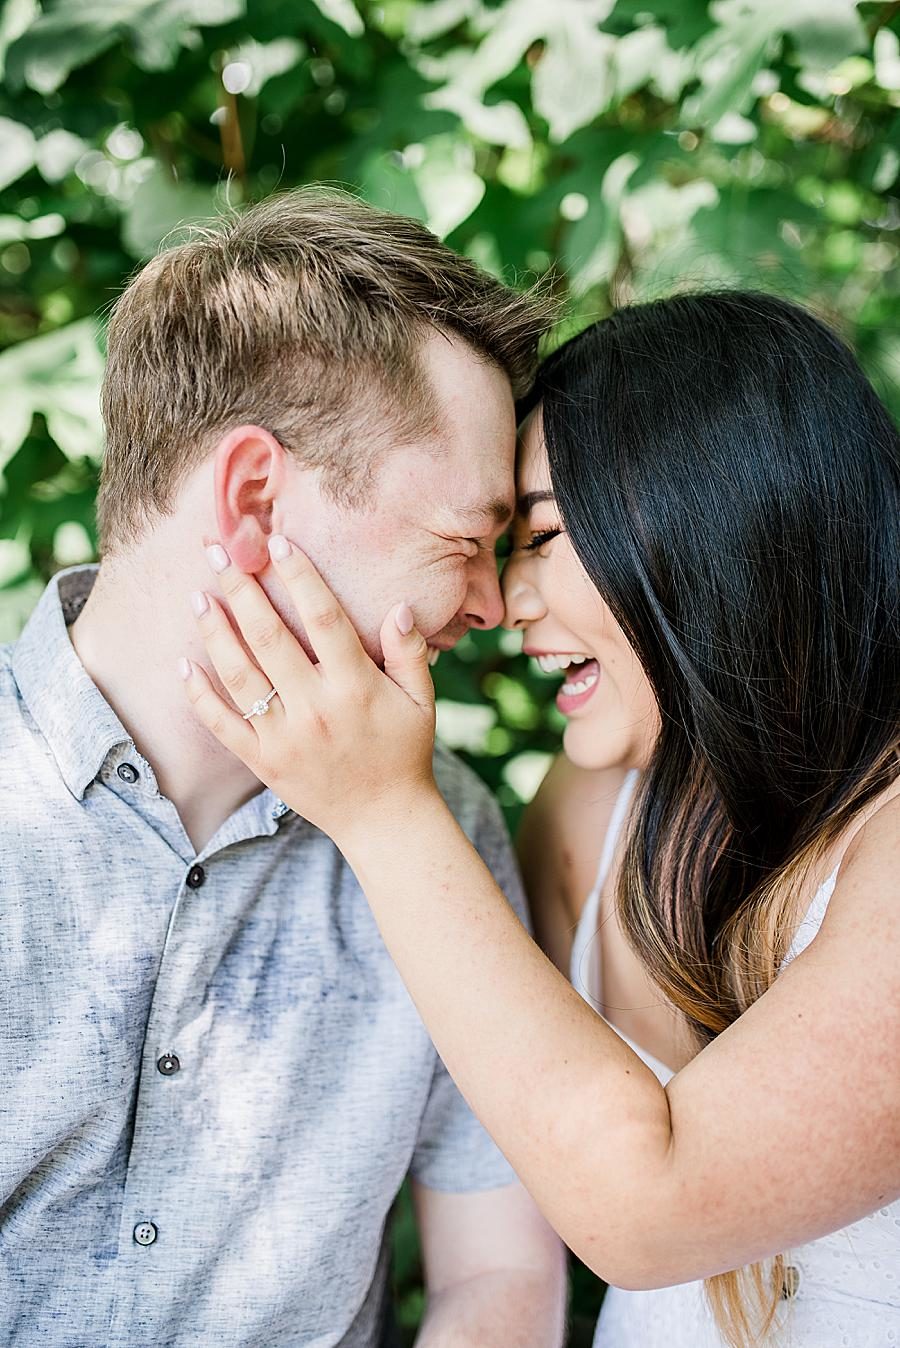 Foreheads together by Knoxville Wedding Photographer, Amanda May Photos.